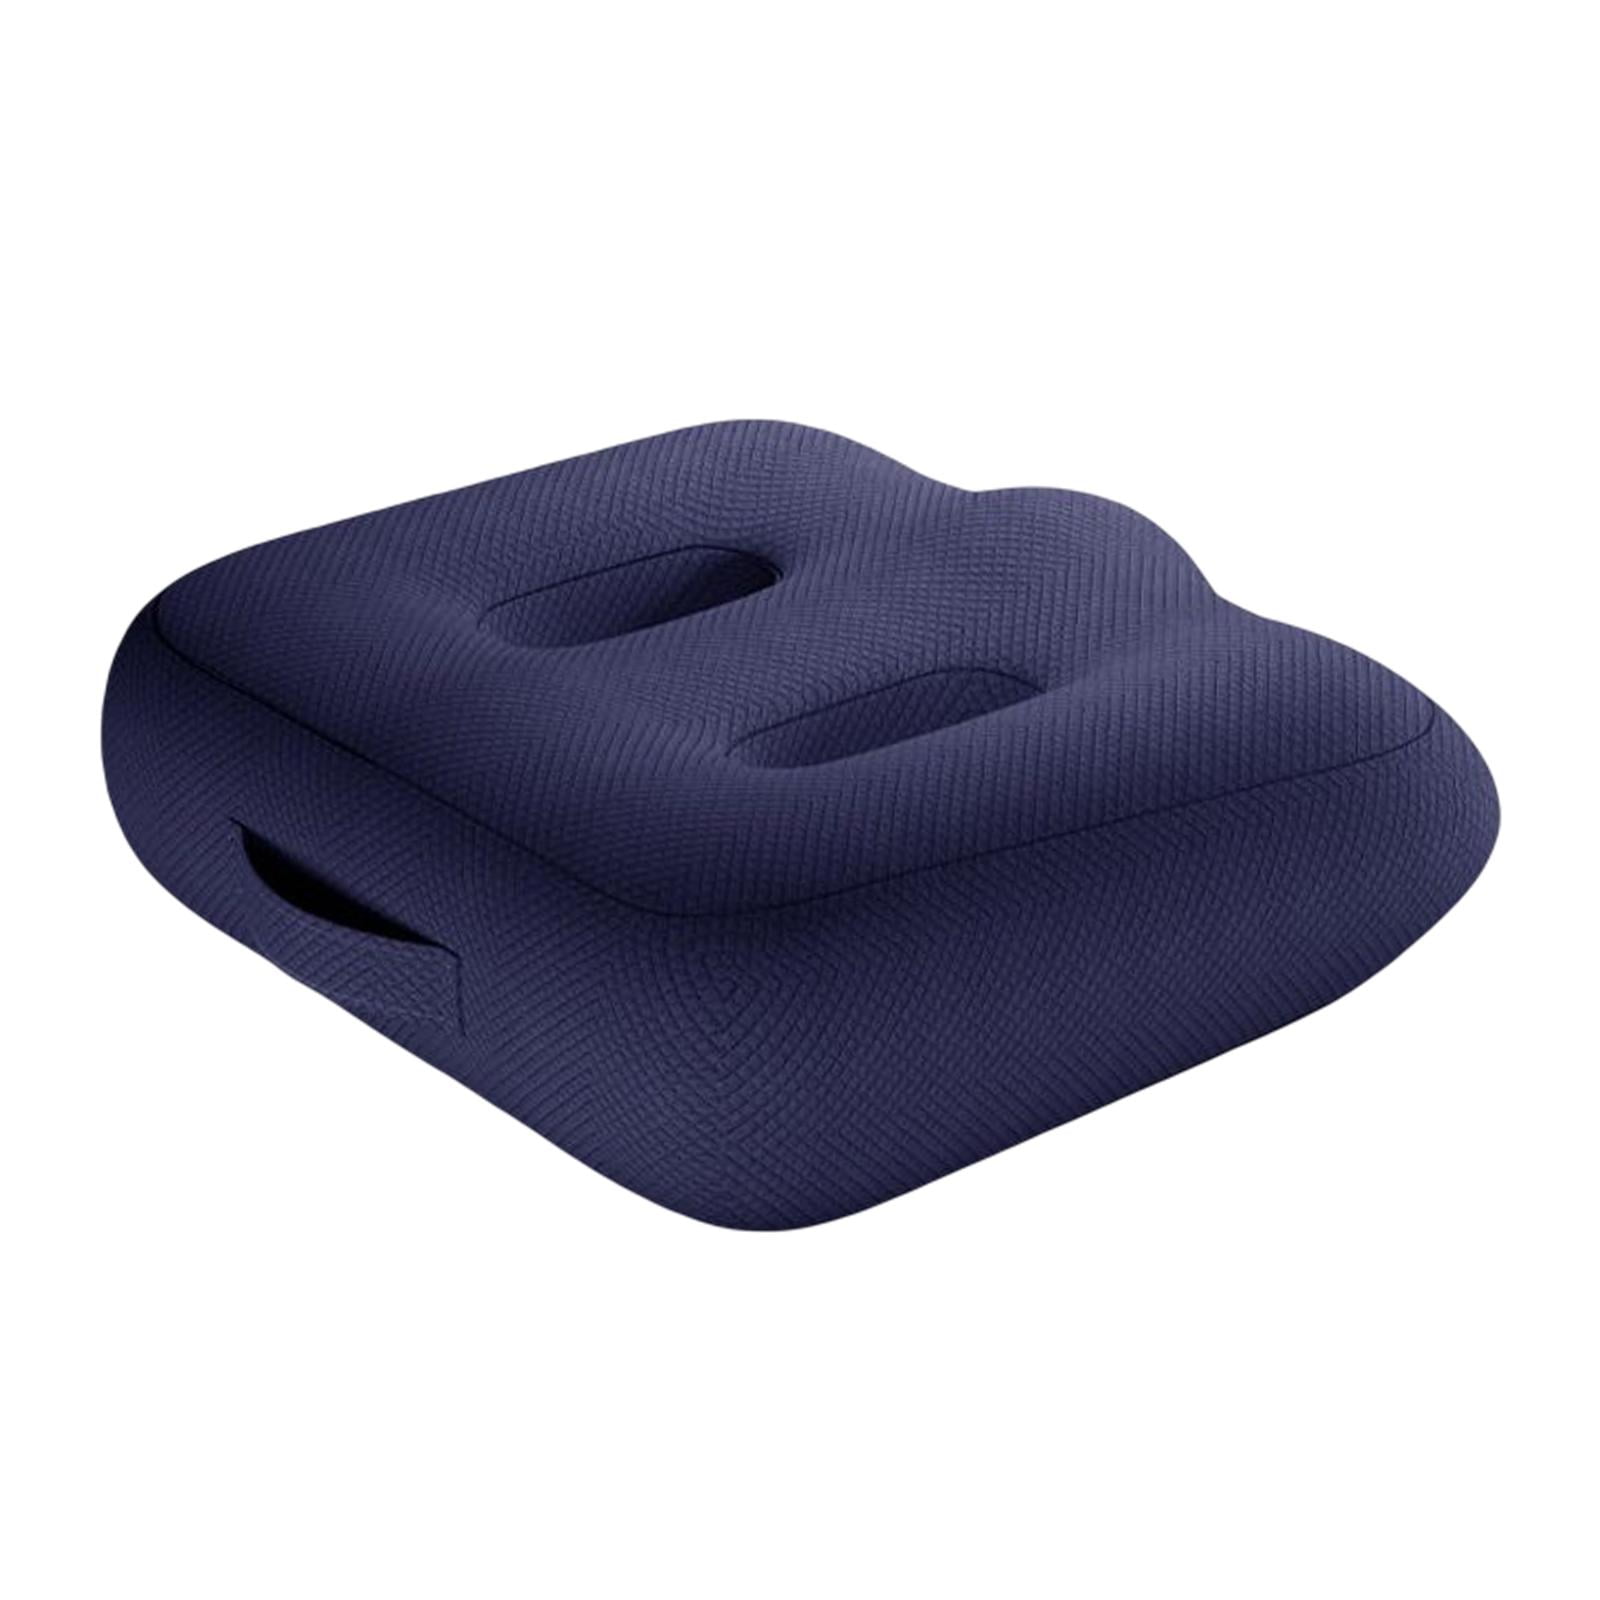 Universal Car Booster Seat Cushion with Portable Handle